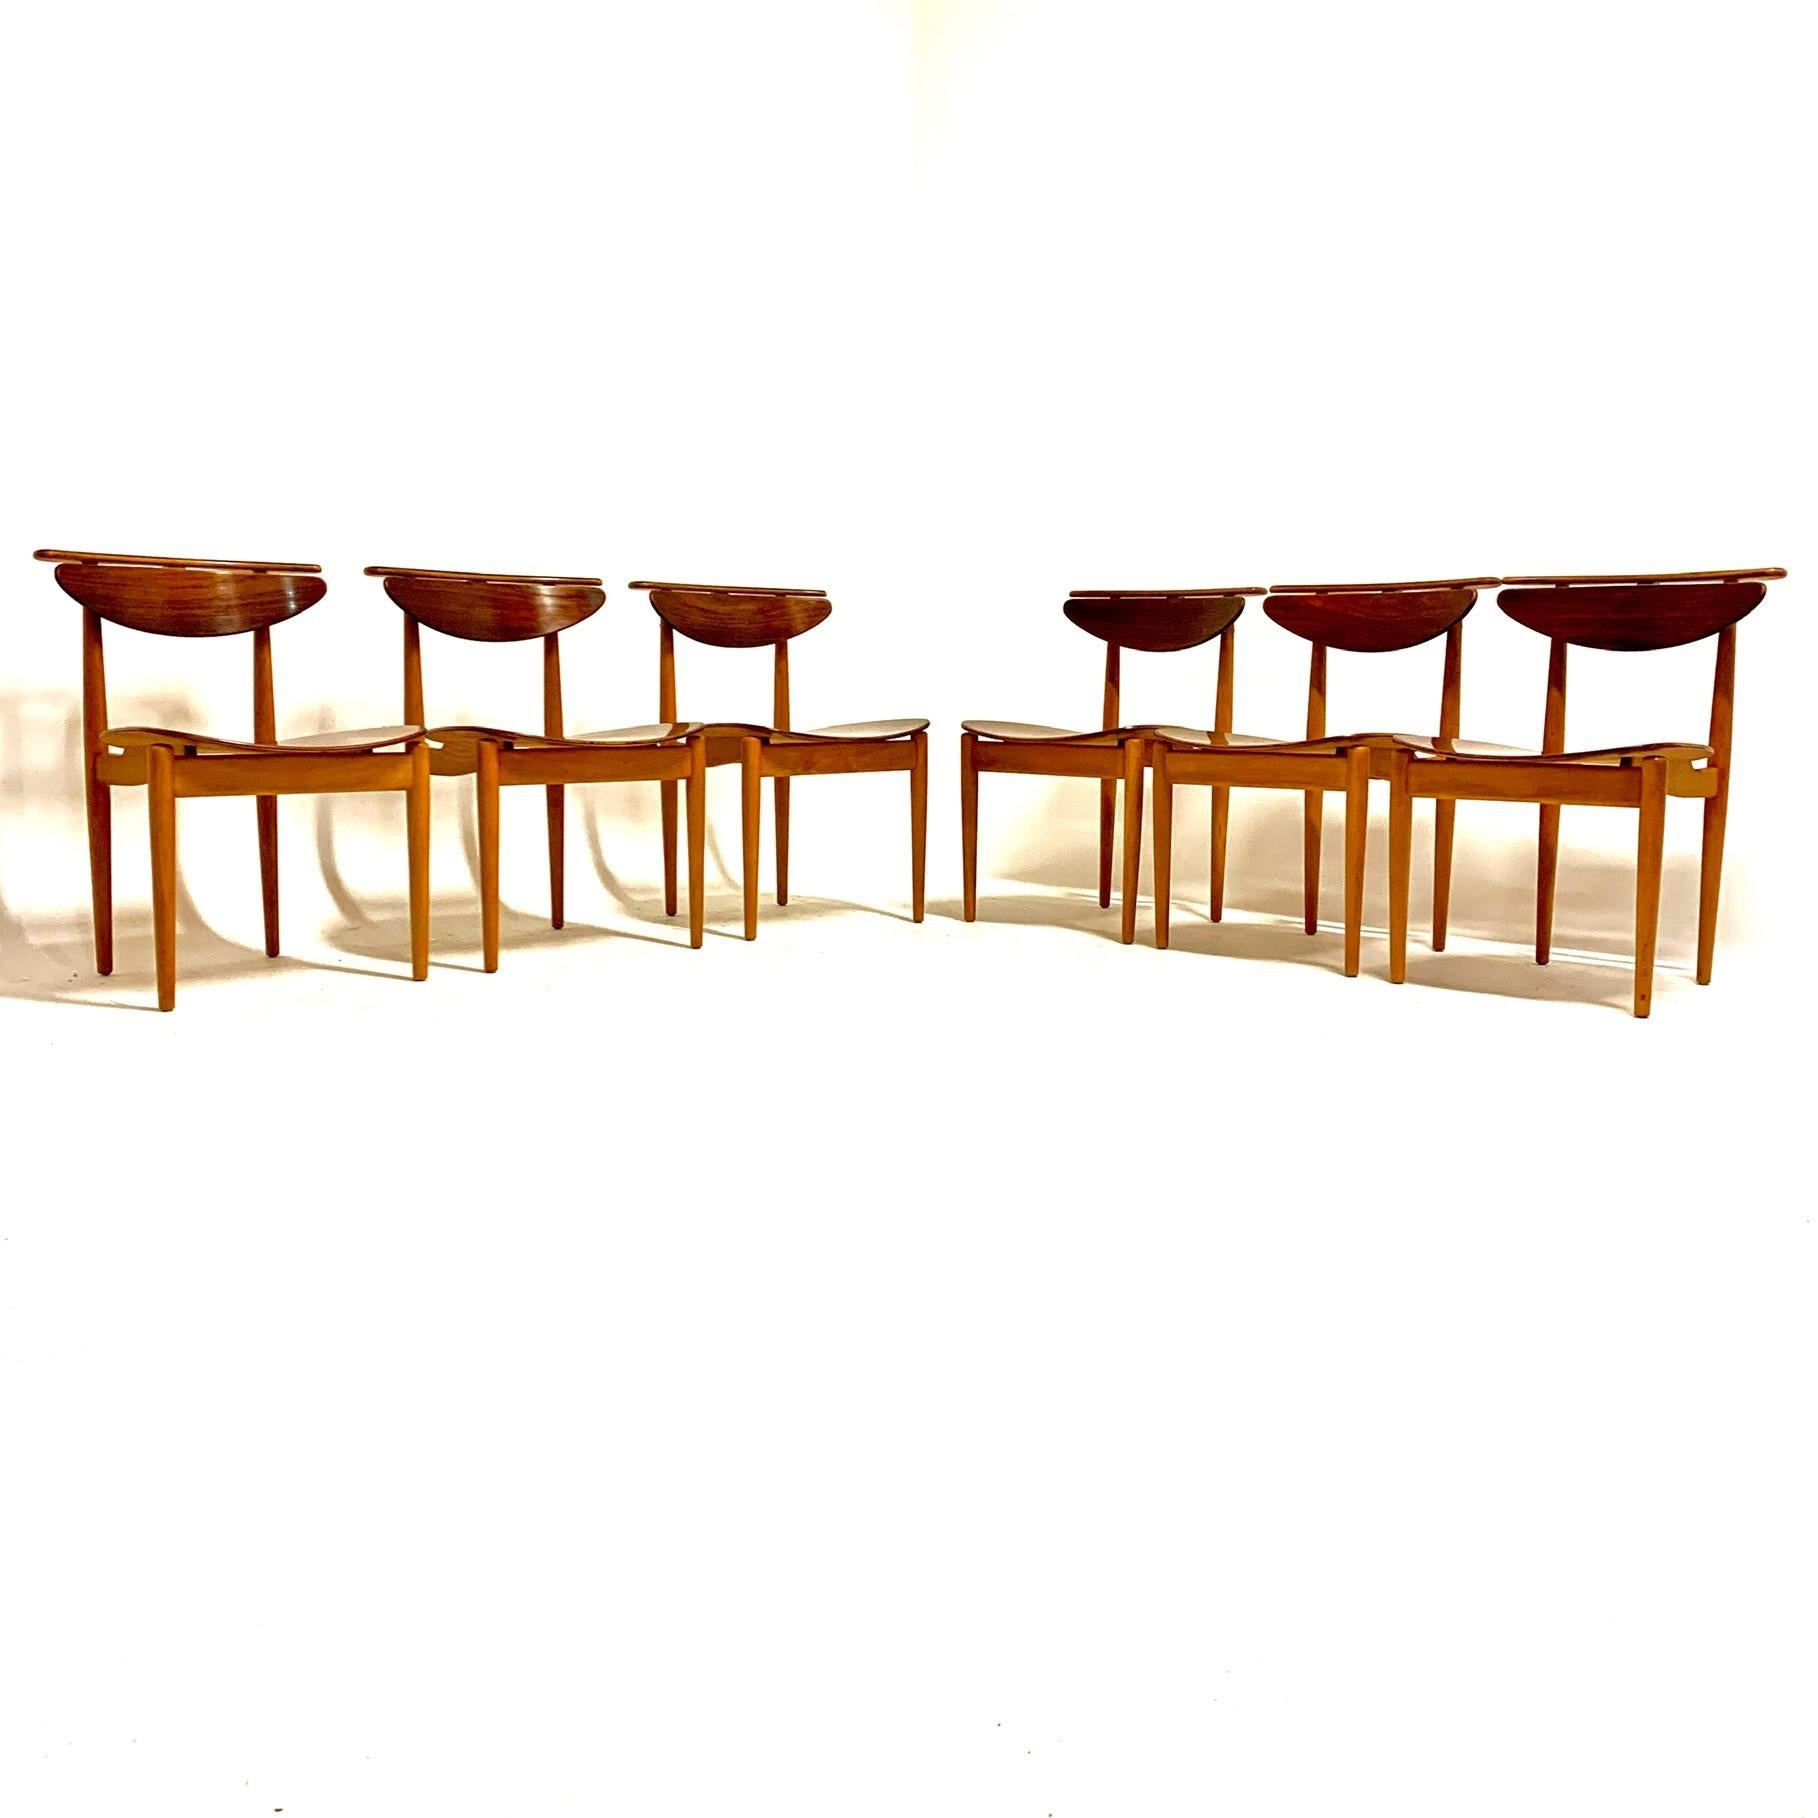 6 rosewood/ beech BO 62 chairs. This model was presented at the exhibition “Købestævnet” in Fredericia, 1953. The chair was awarded the gold medal at the 10th Triennale in Milan, 1954. This very rare version of the BO62 chair by Finn Juhl veneered